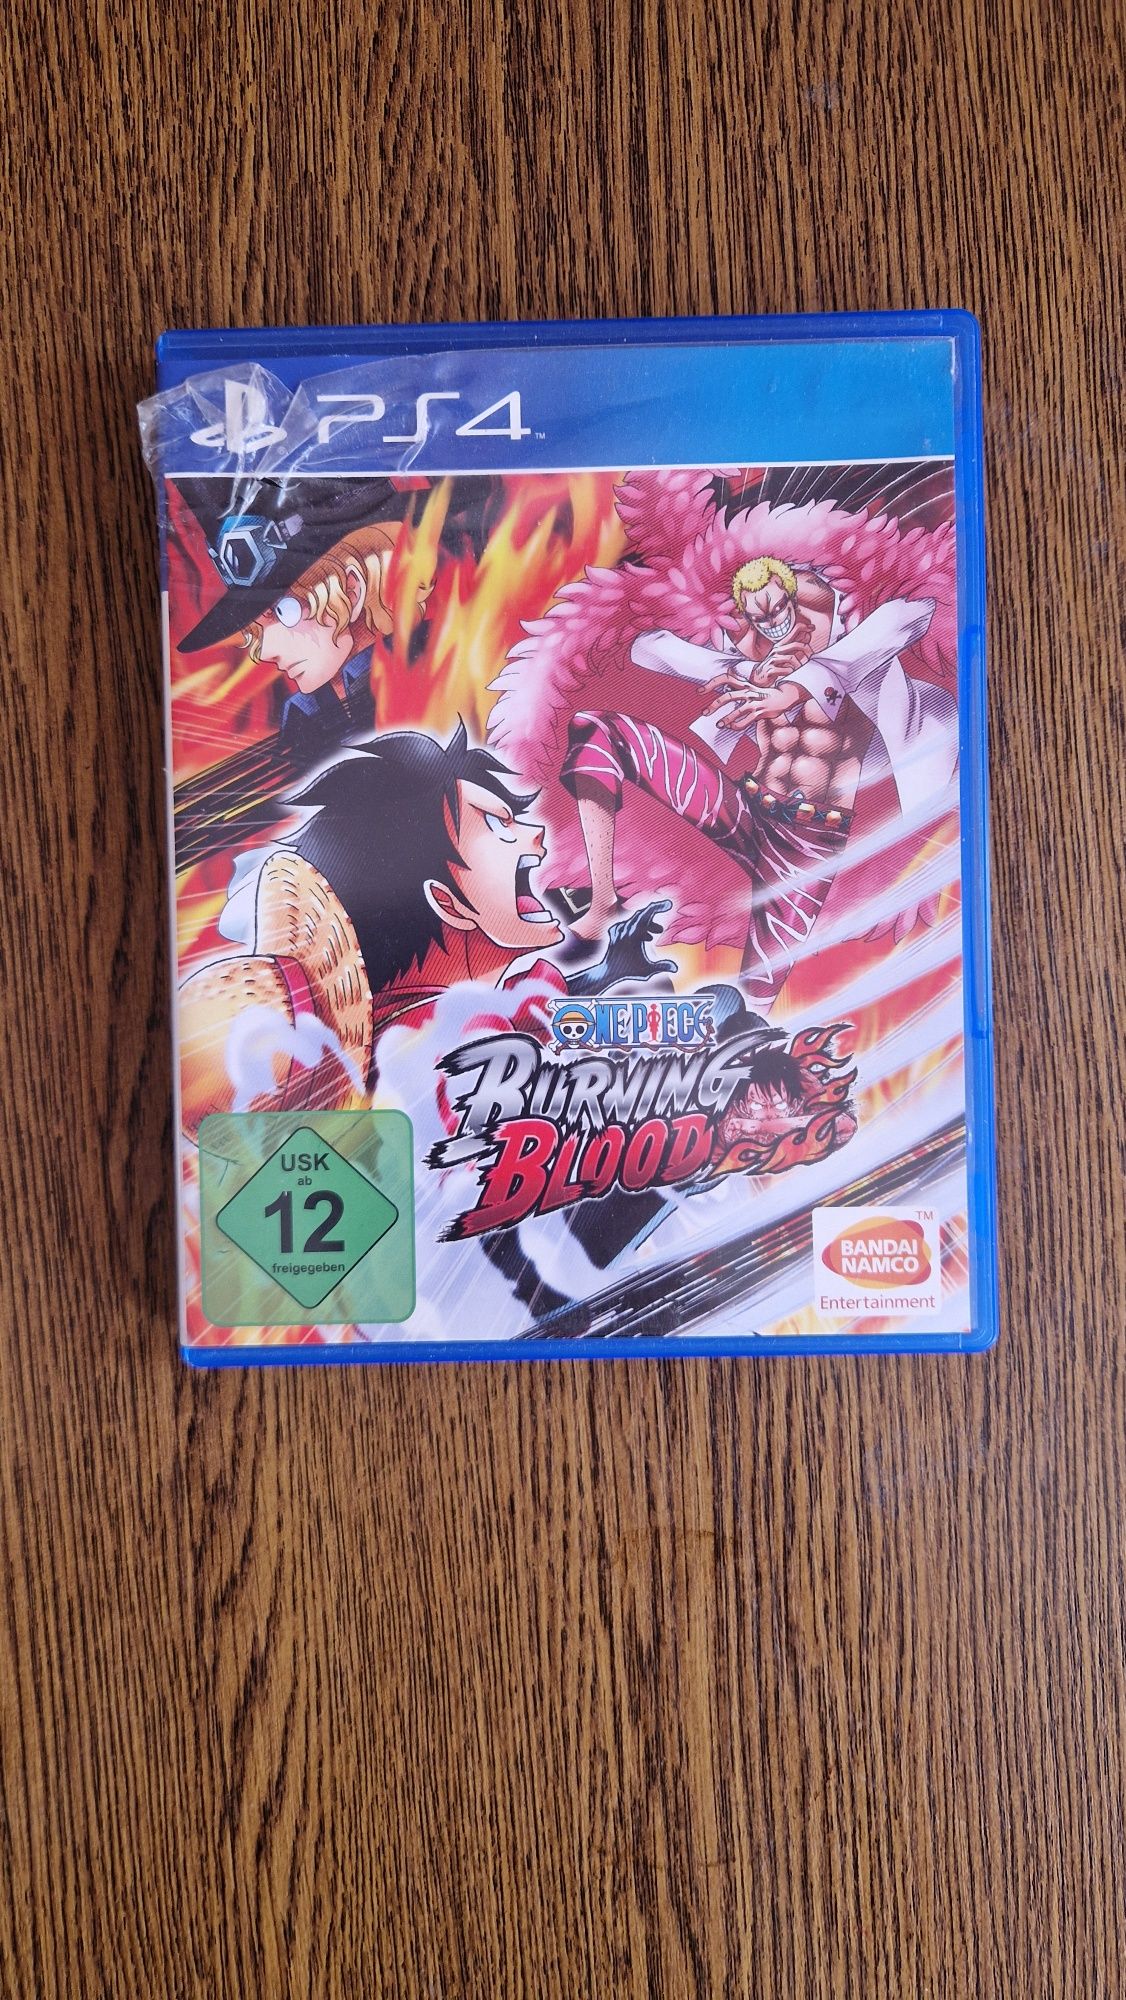 Play station 4 one piece burning blood ps4